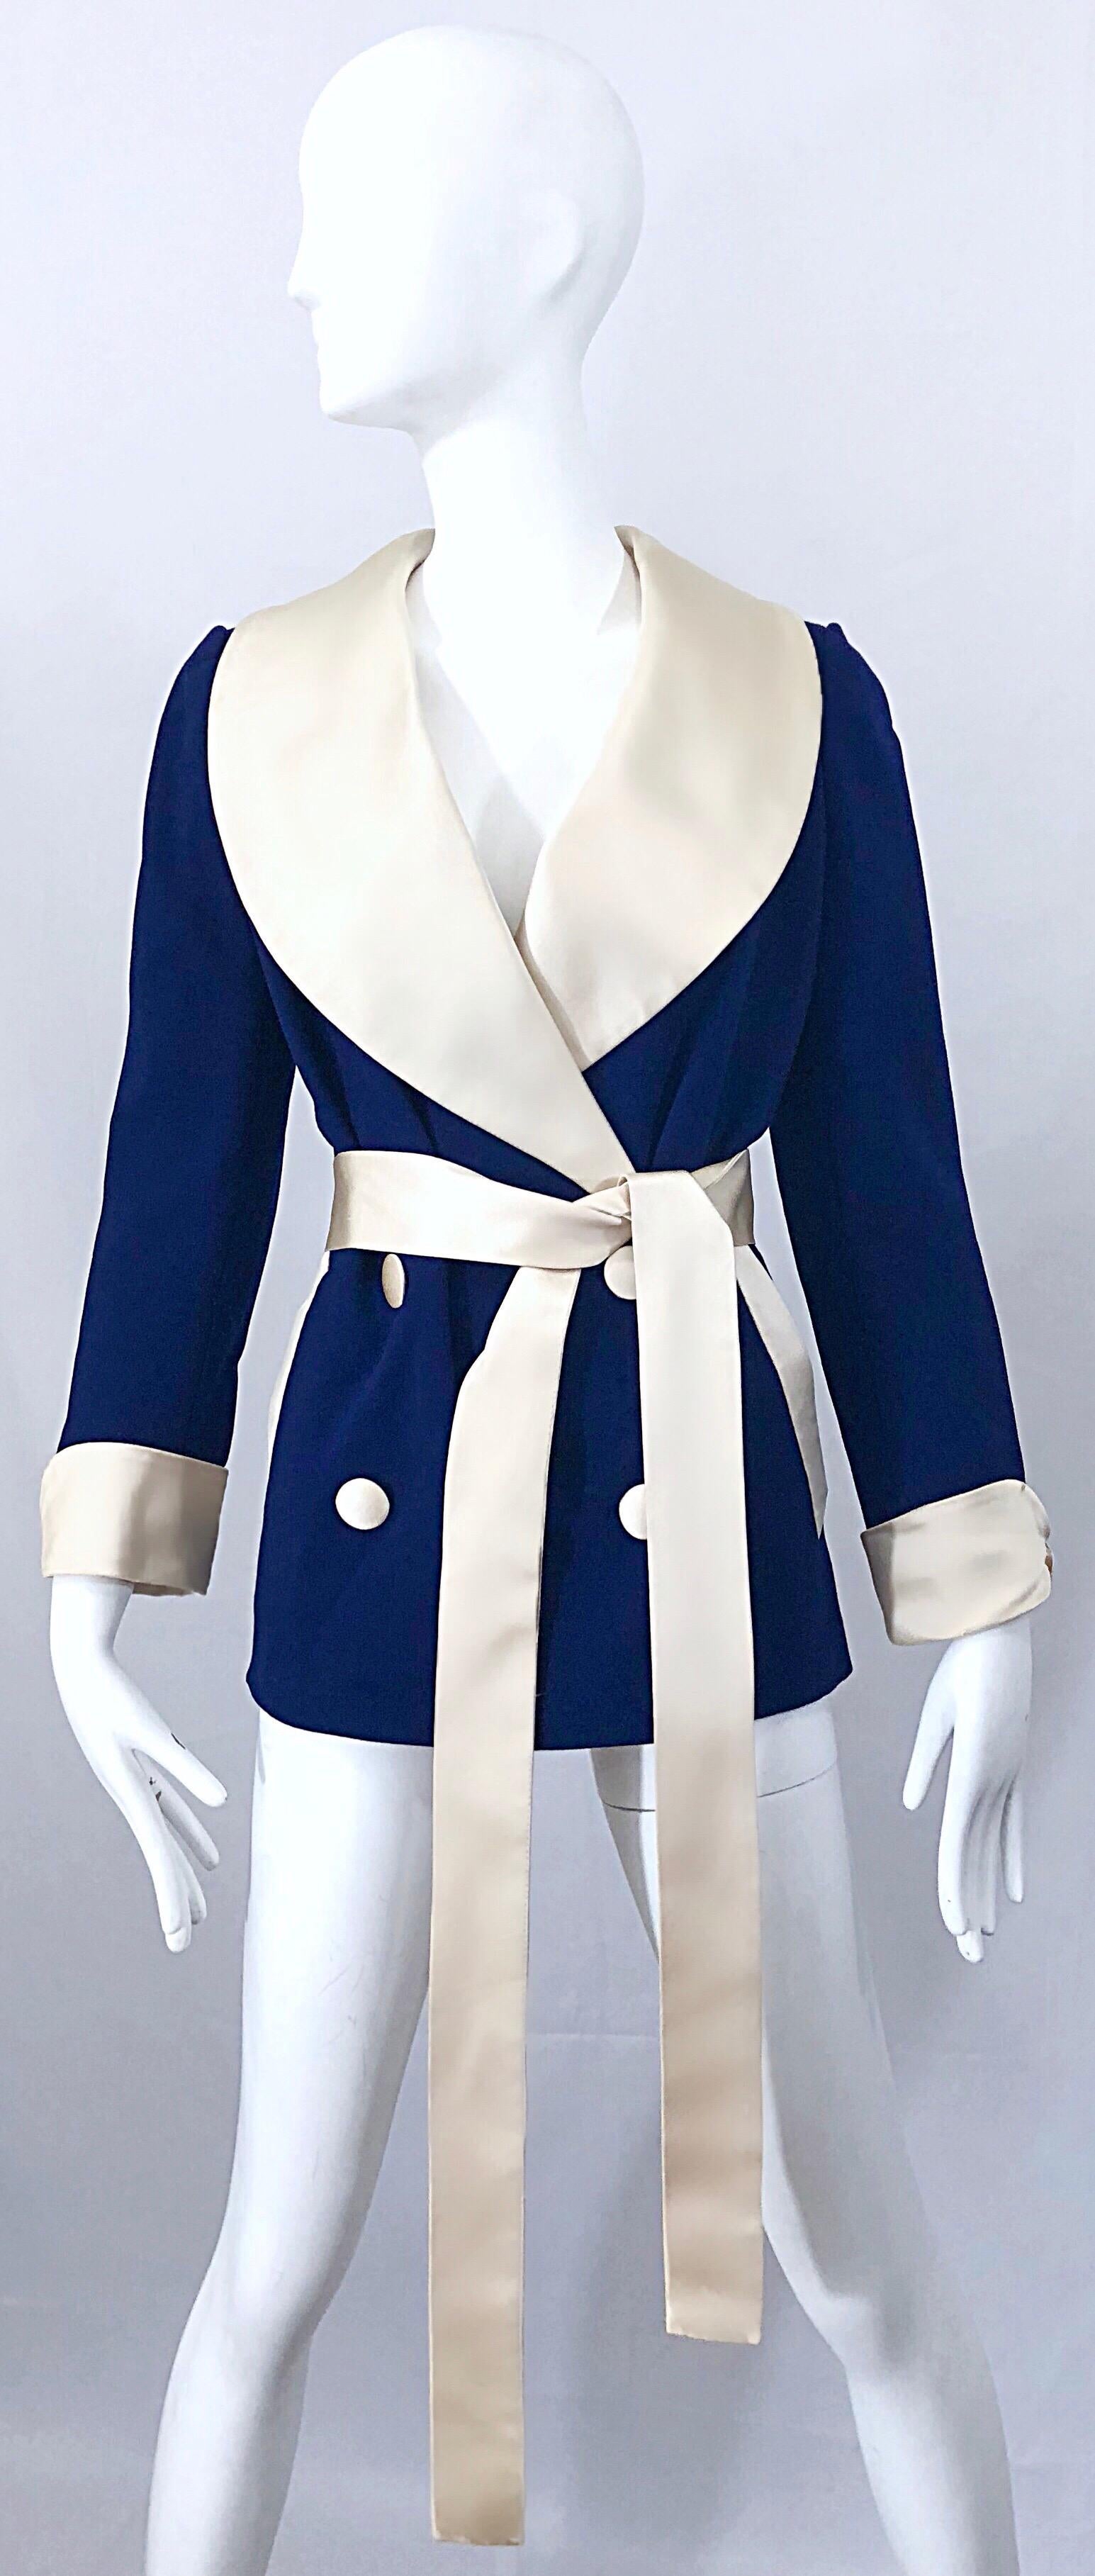 Rare historical piece of fashion from the brilliant NORMAN NORELL! Navy blue wool body, with any ivory satin shawl collar, sleeve cuffs, buttons, pockets and sash belt. Buttons are not functional, as there are hidden snaps behind the buttons. Double